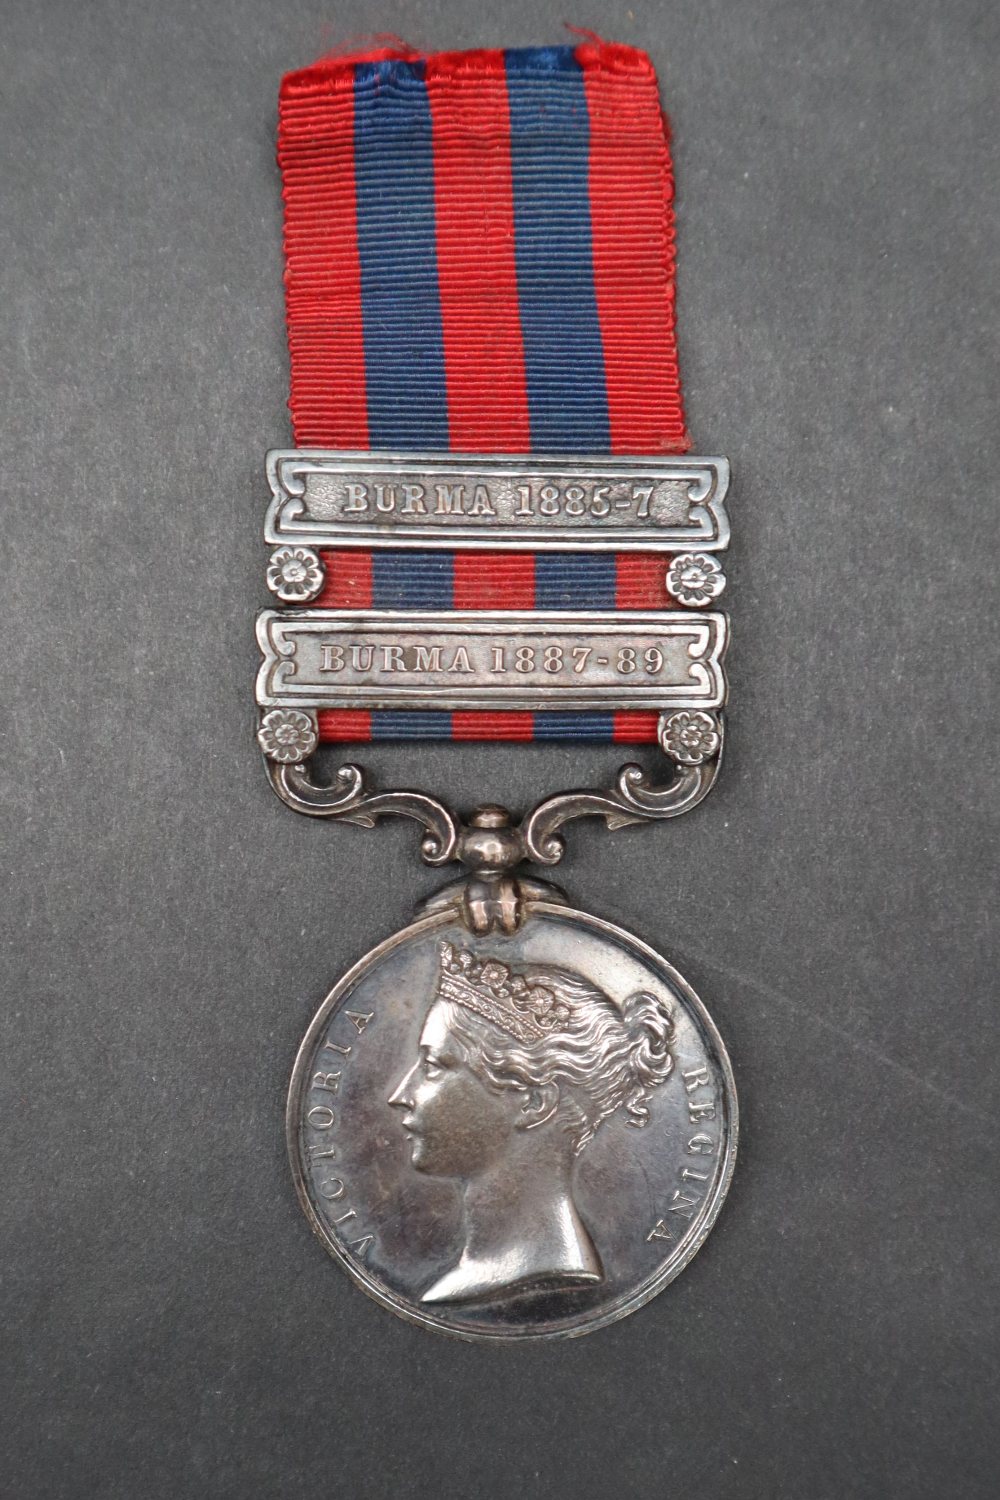 A Victorian Indian General service medal with two bars for Burma 1885-7 and Burma 1887-89 awarded